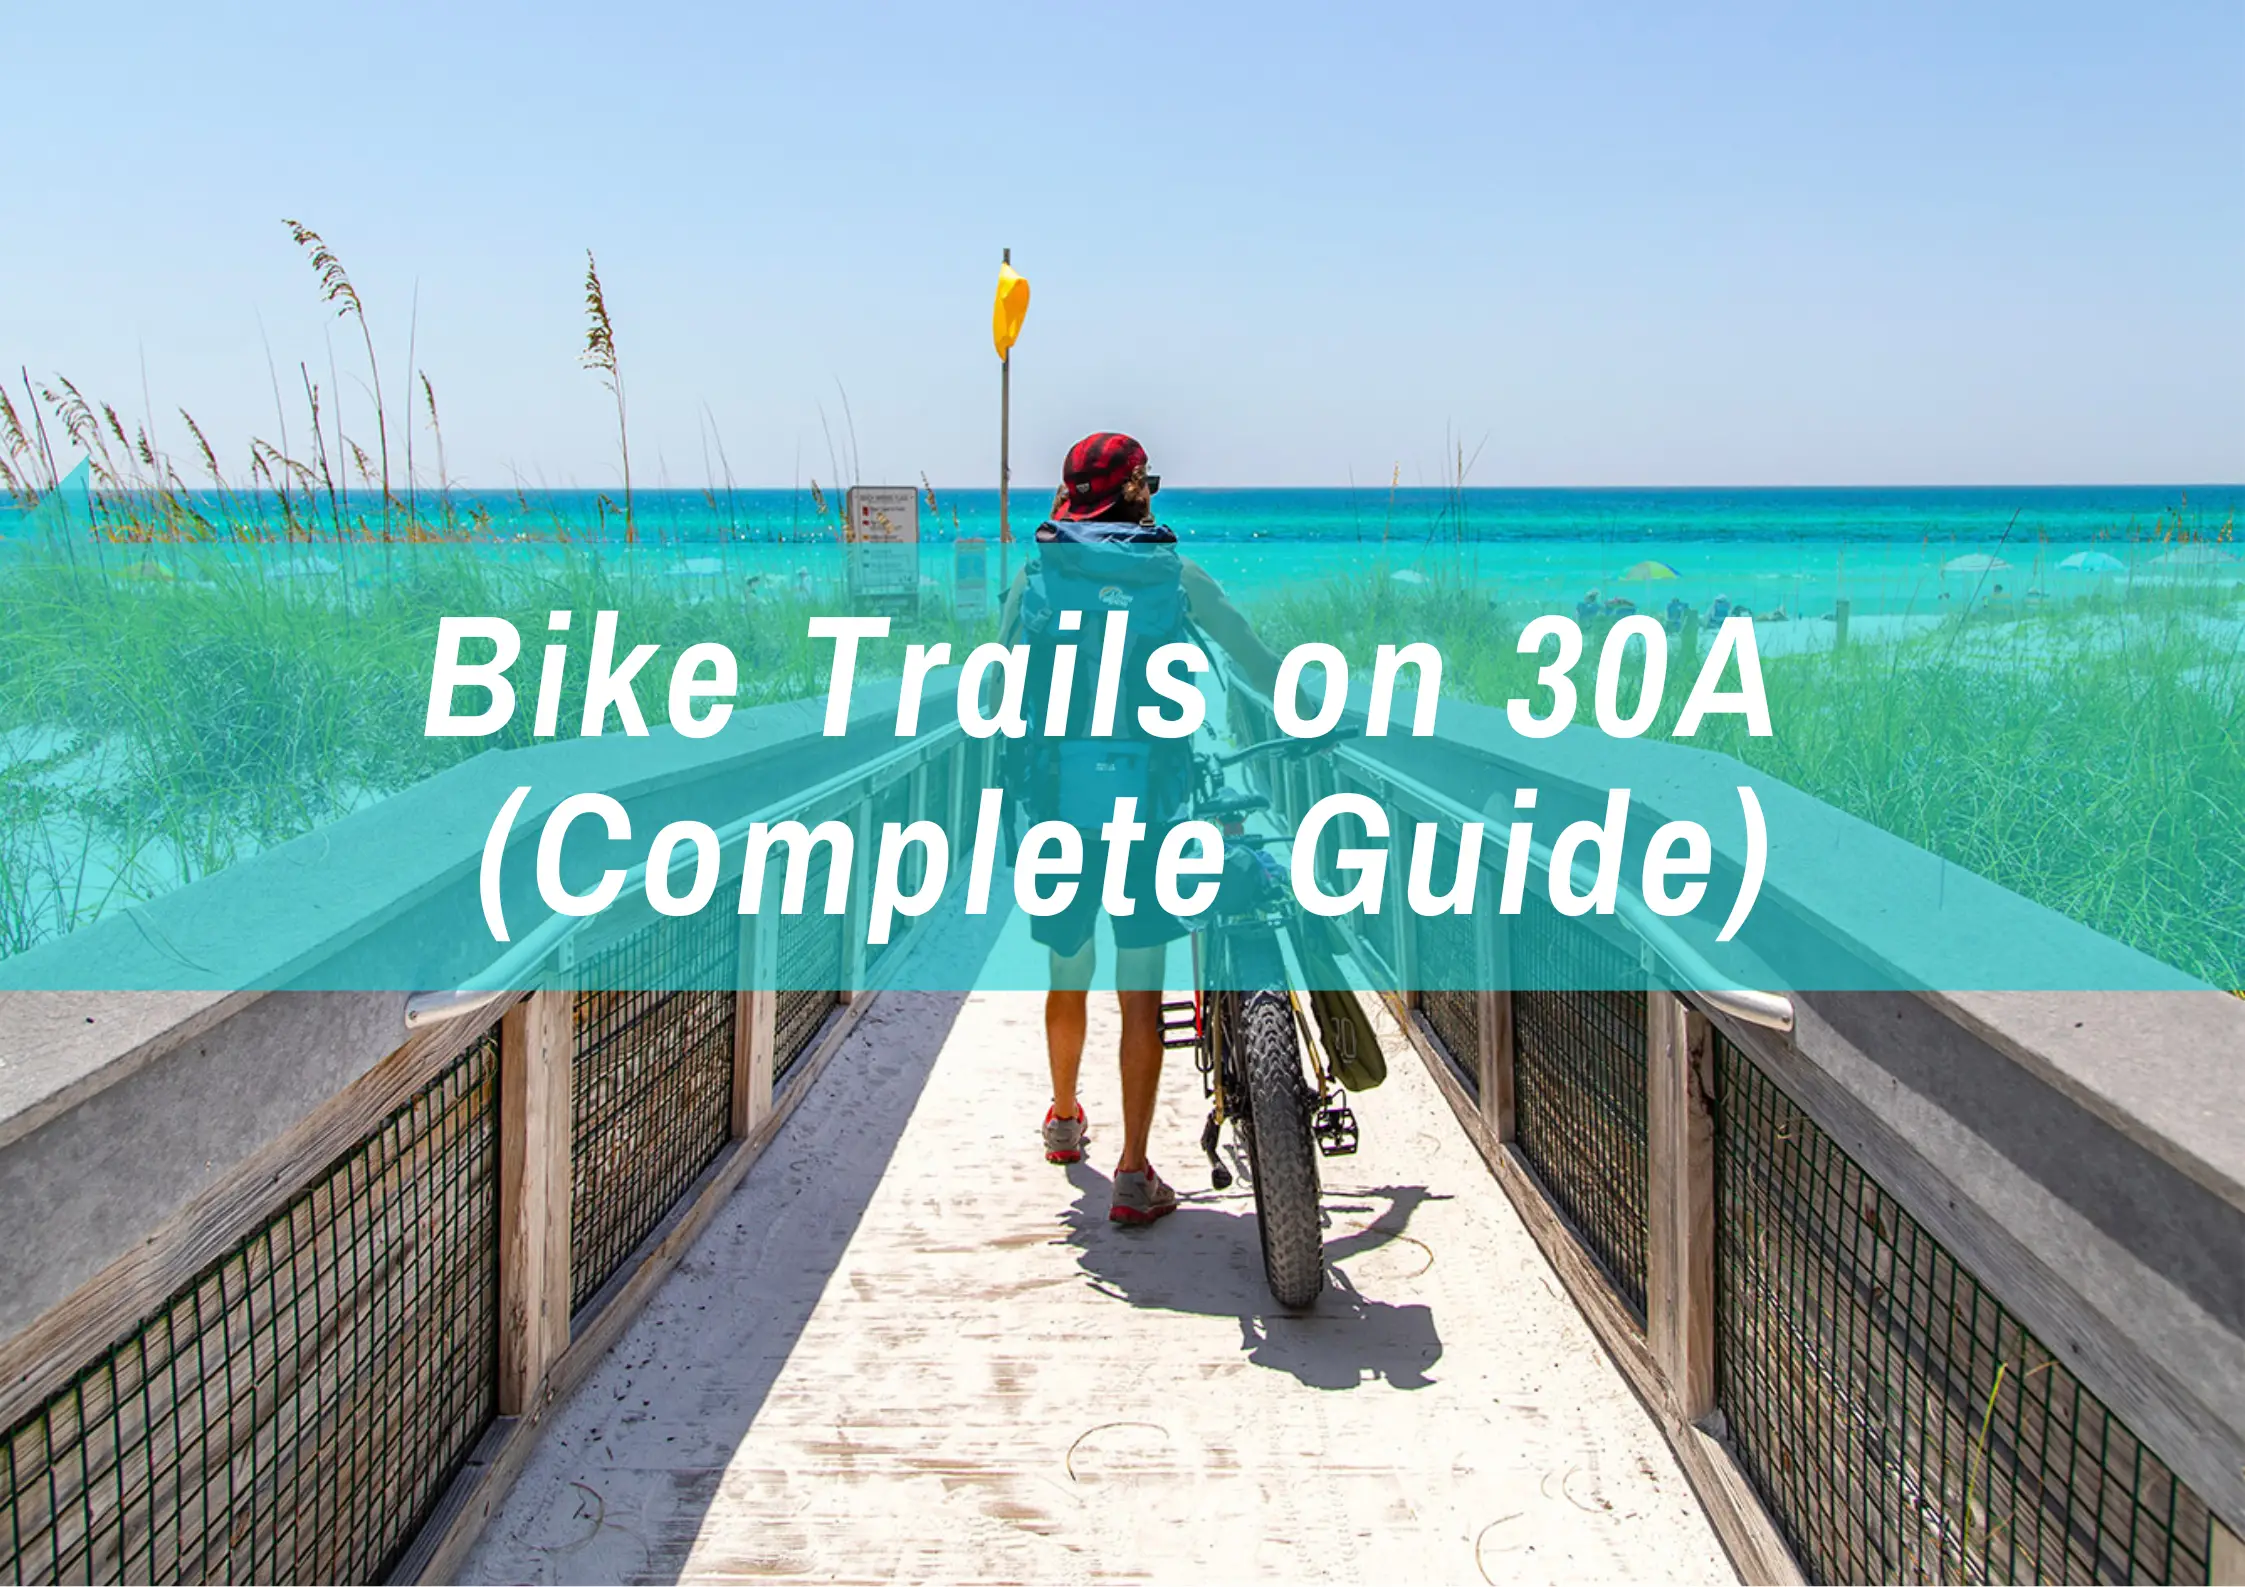 Bike Trails on 30A (Complete Guide)